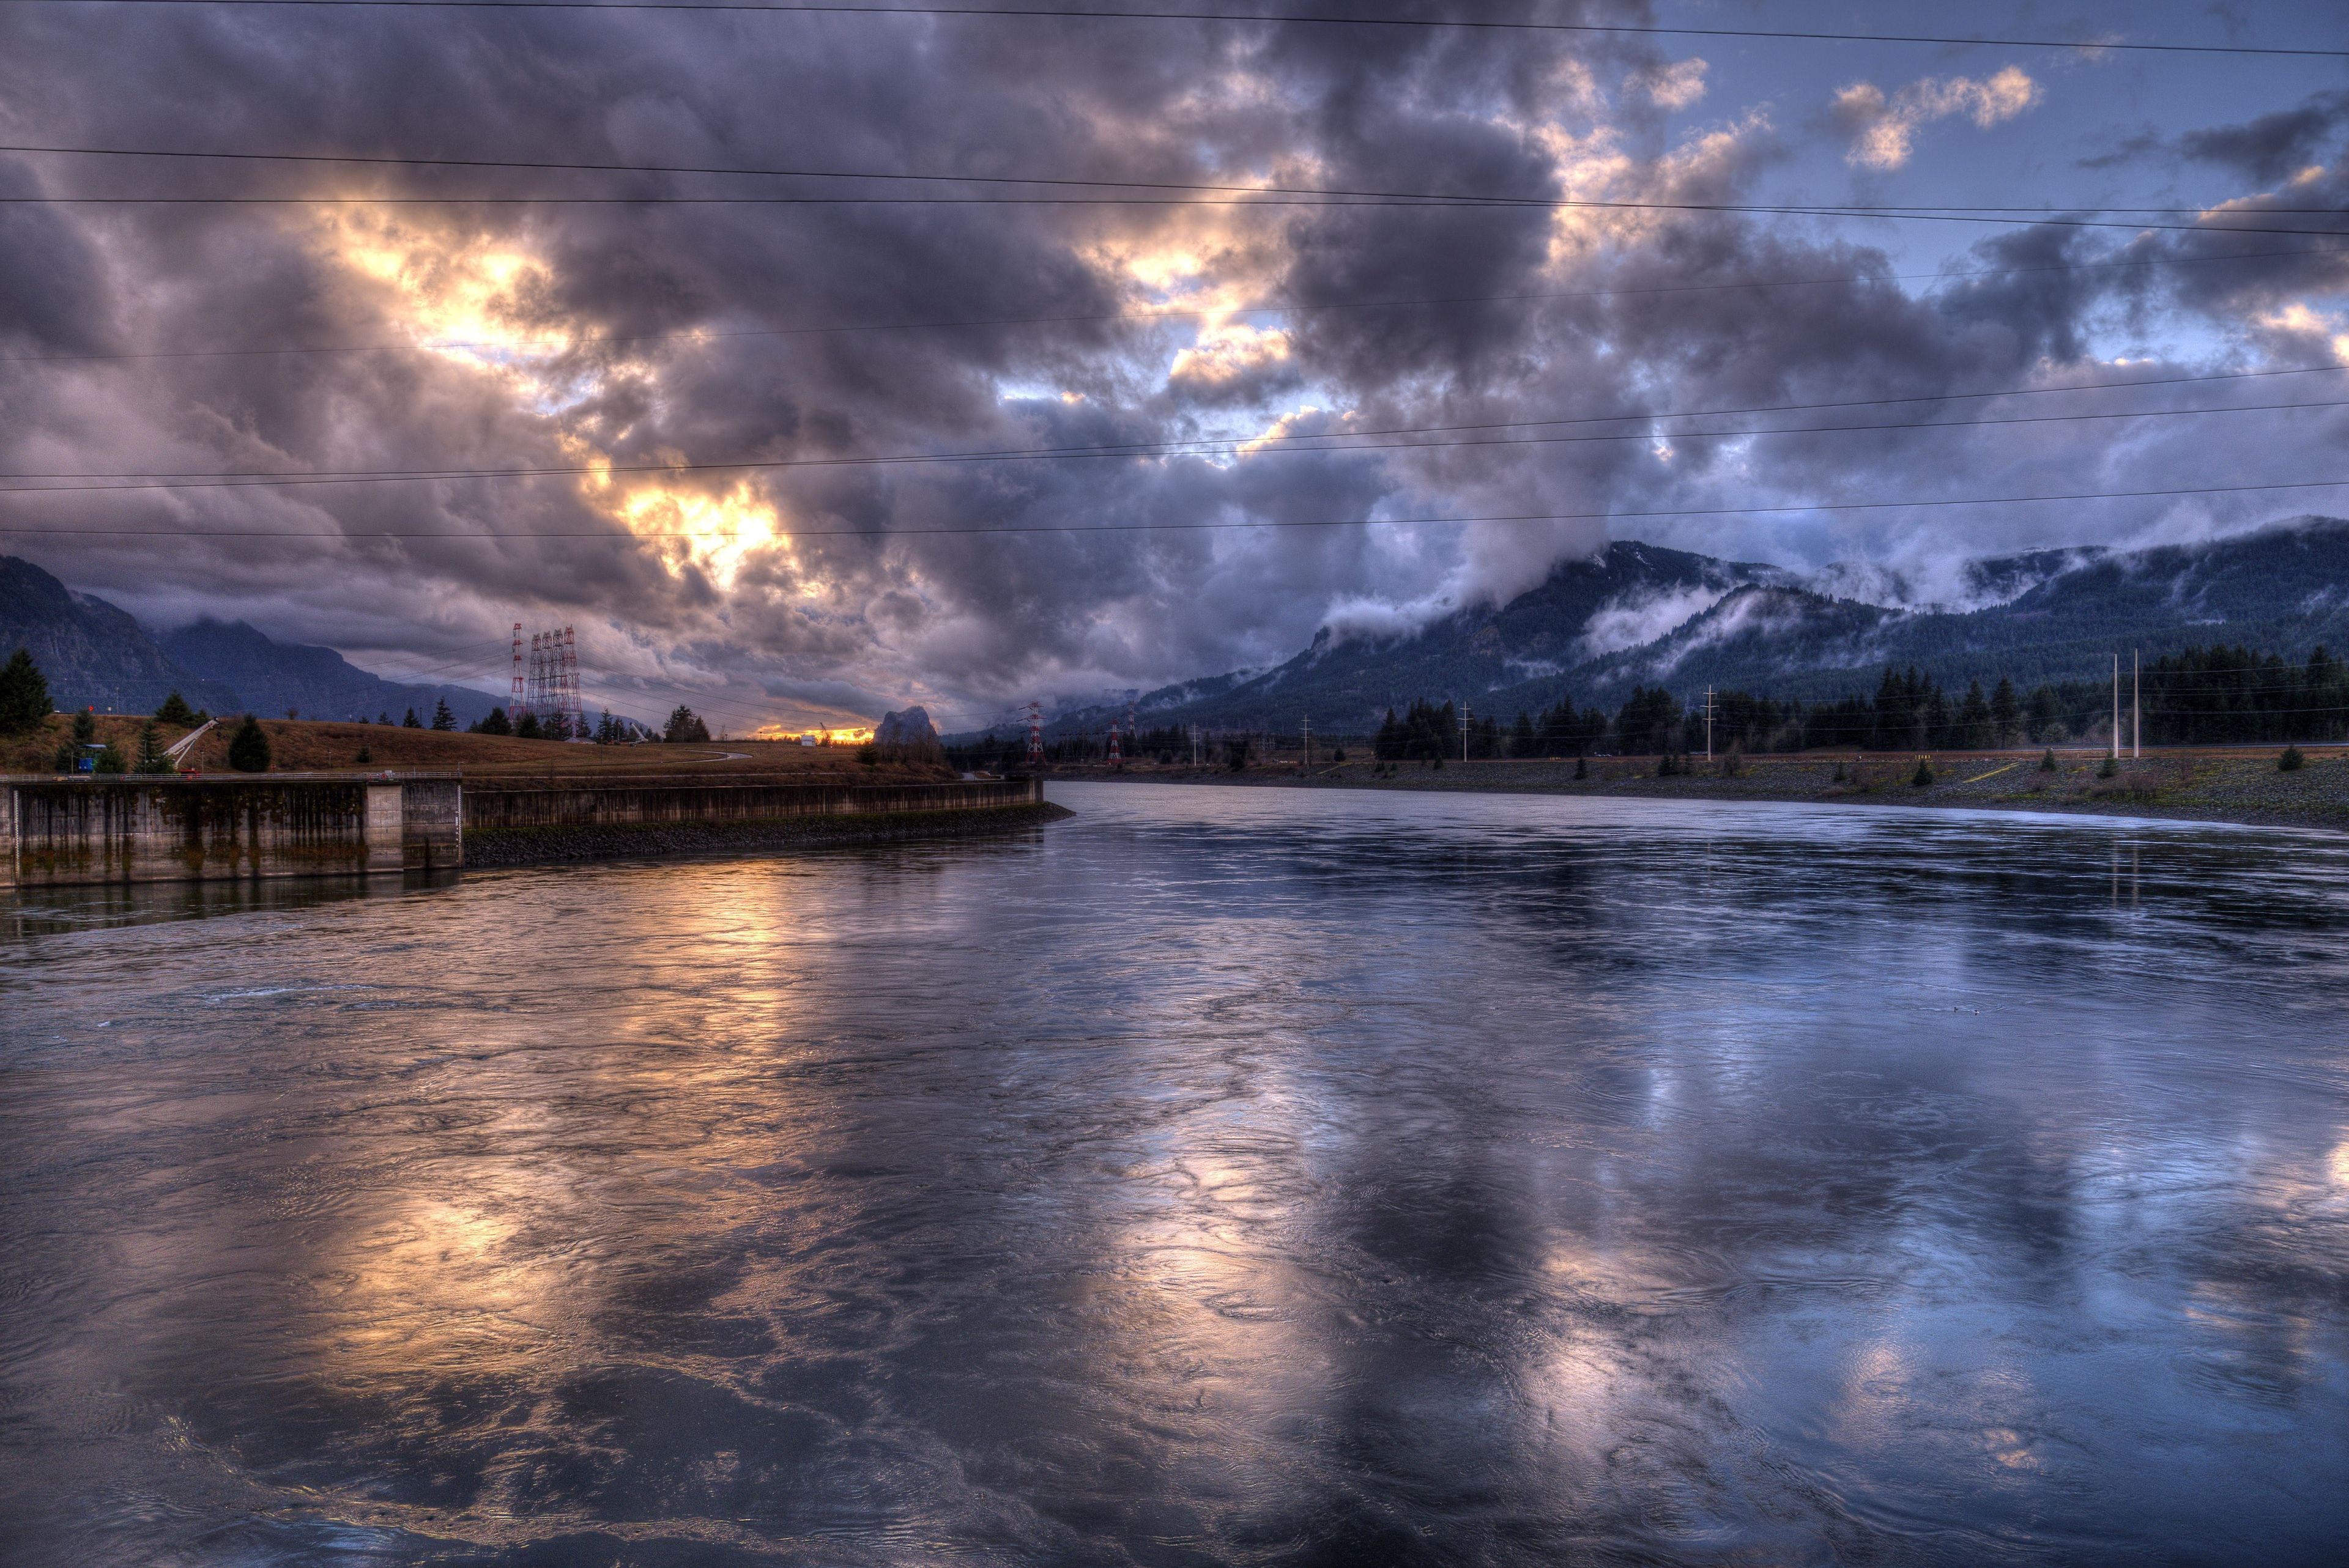 The sun sets over the frozen Columbia River in the winter.